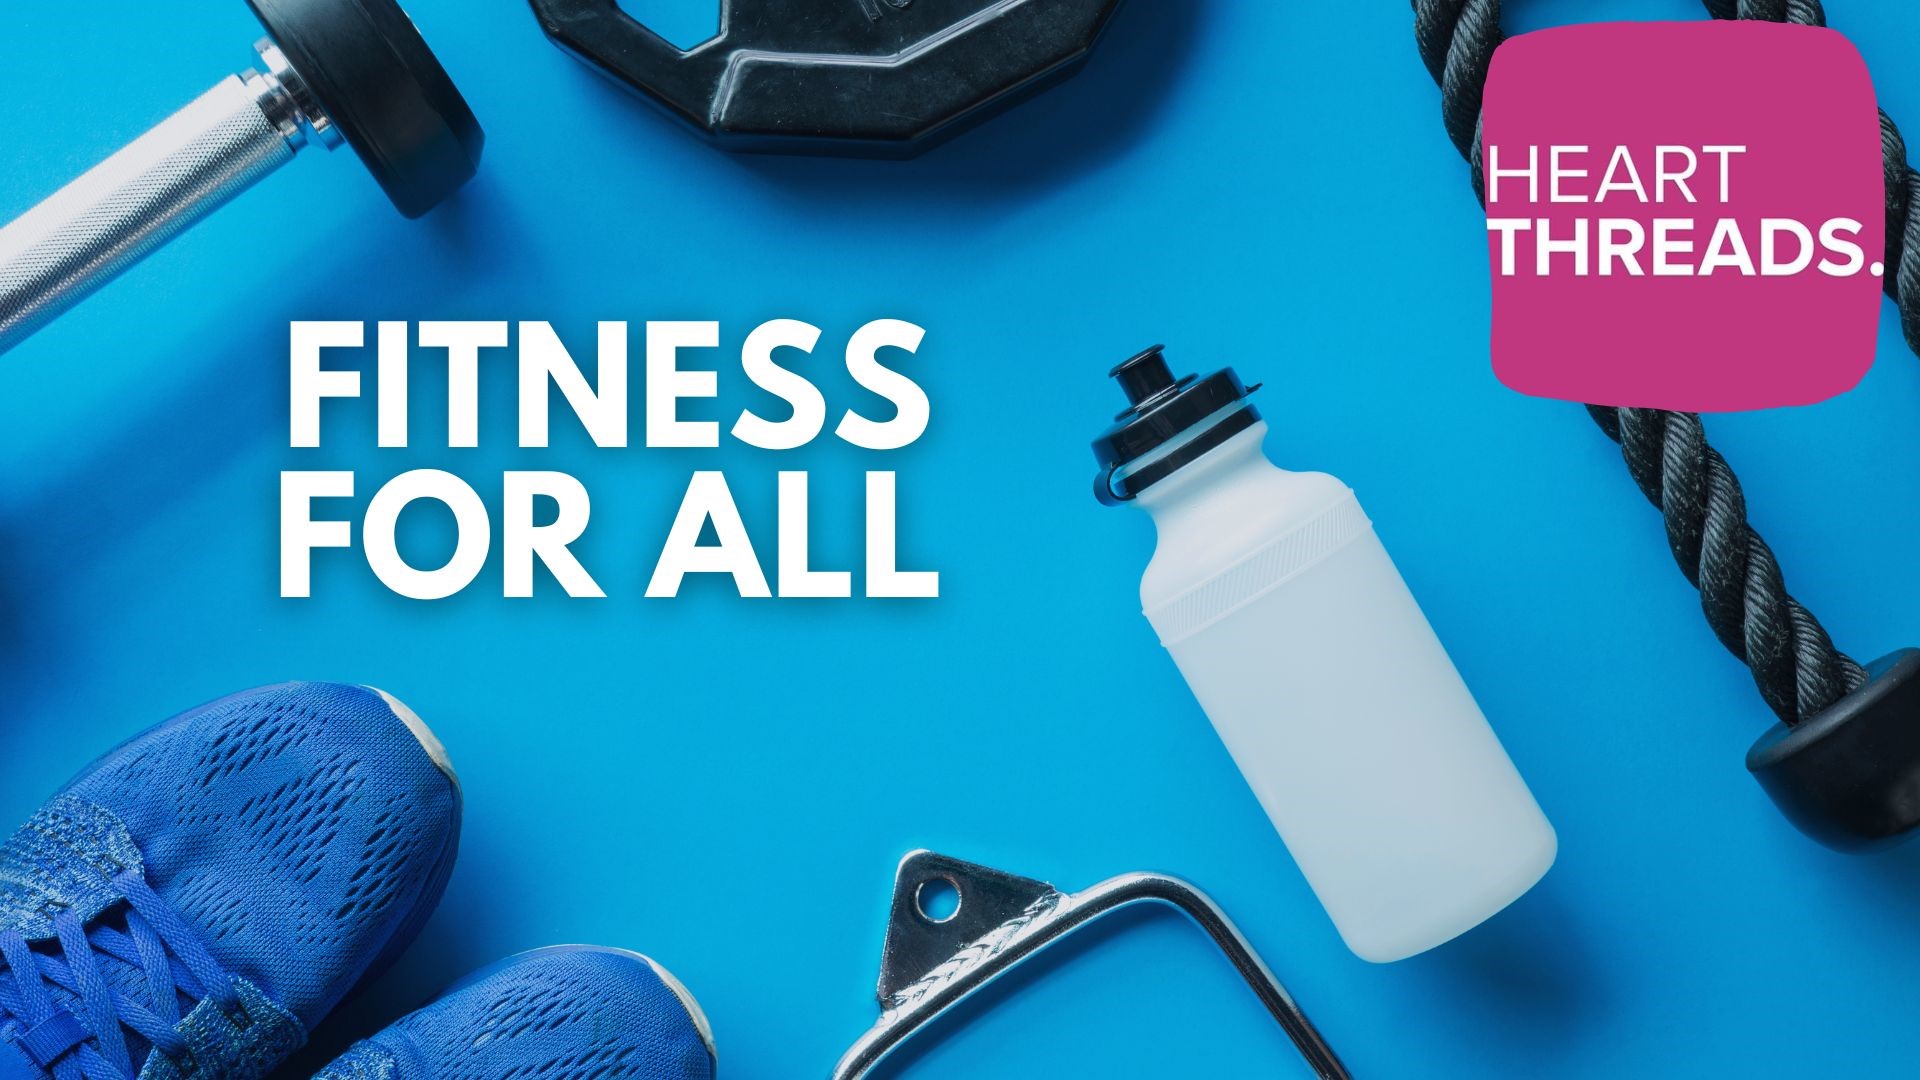 Uplifting stories showing on fitness and taking care of your wellbeing is for everyone. Plus, meet the coaches and facilities helping make fitness accessible to all.